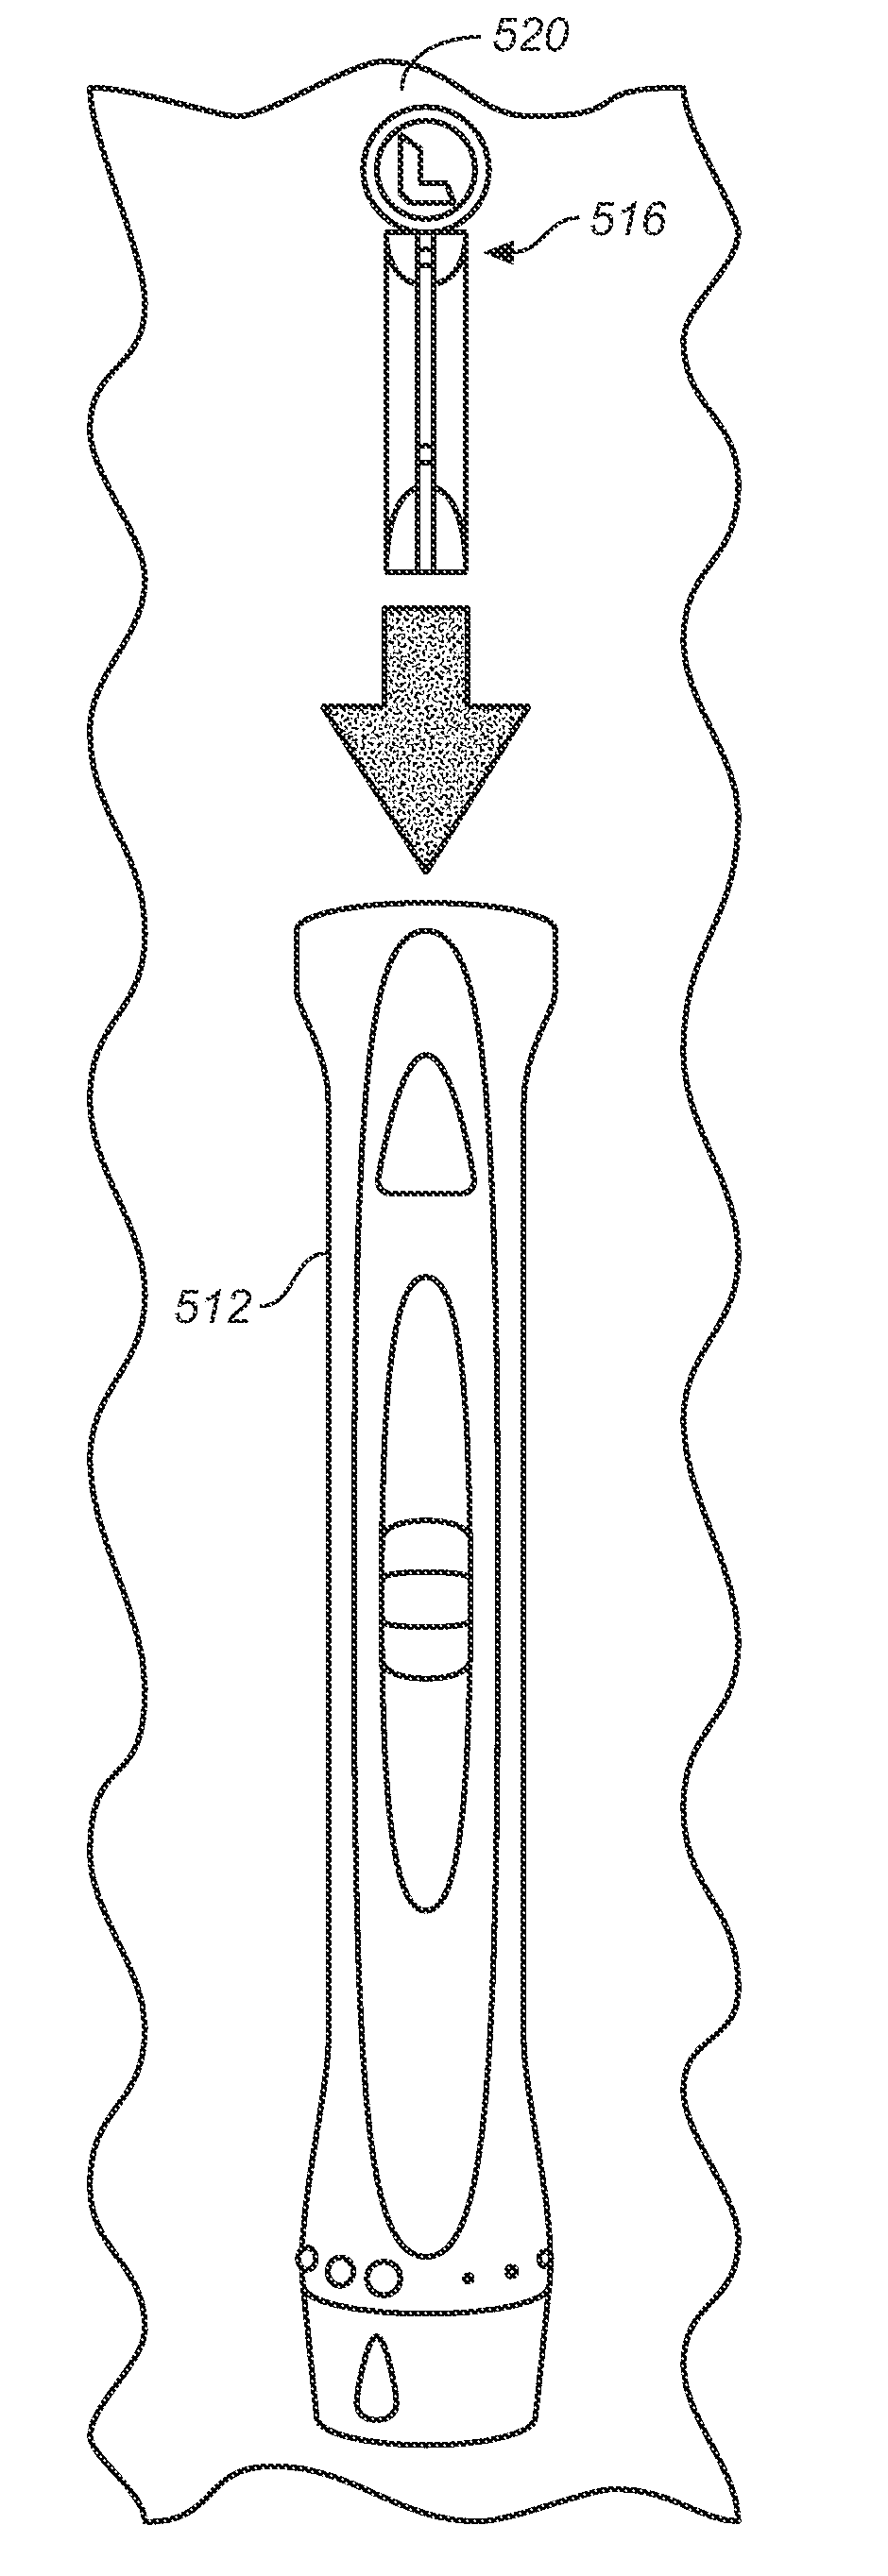 Kit for the determination of an analyte in a bodily fluid sample that includes a meter with a display-based tutorial module